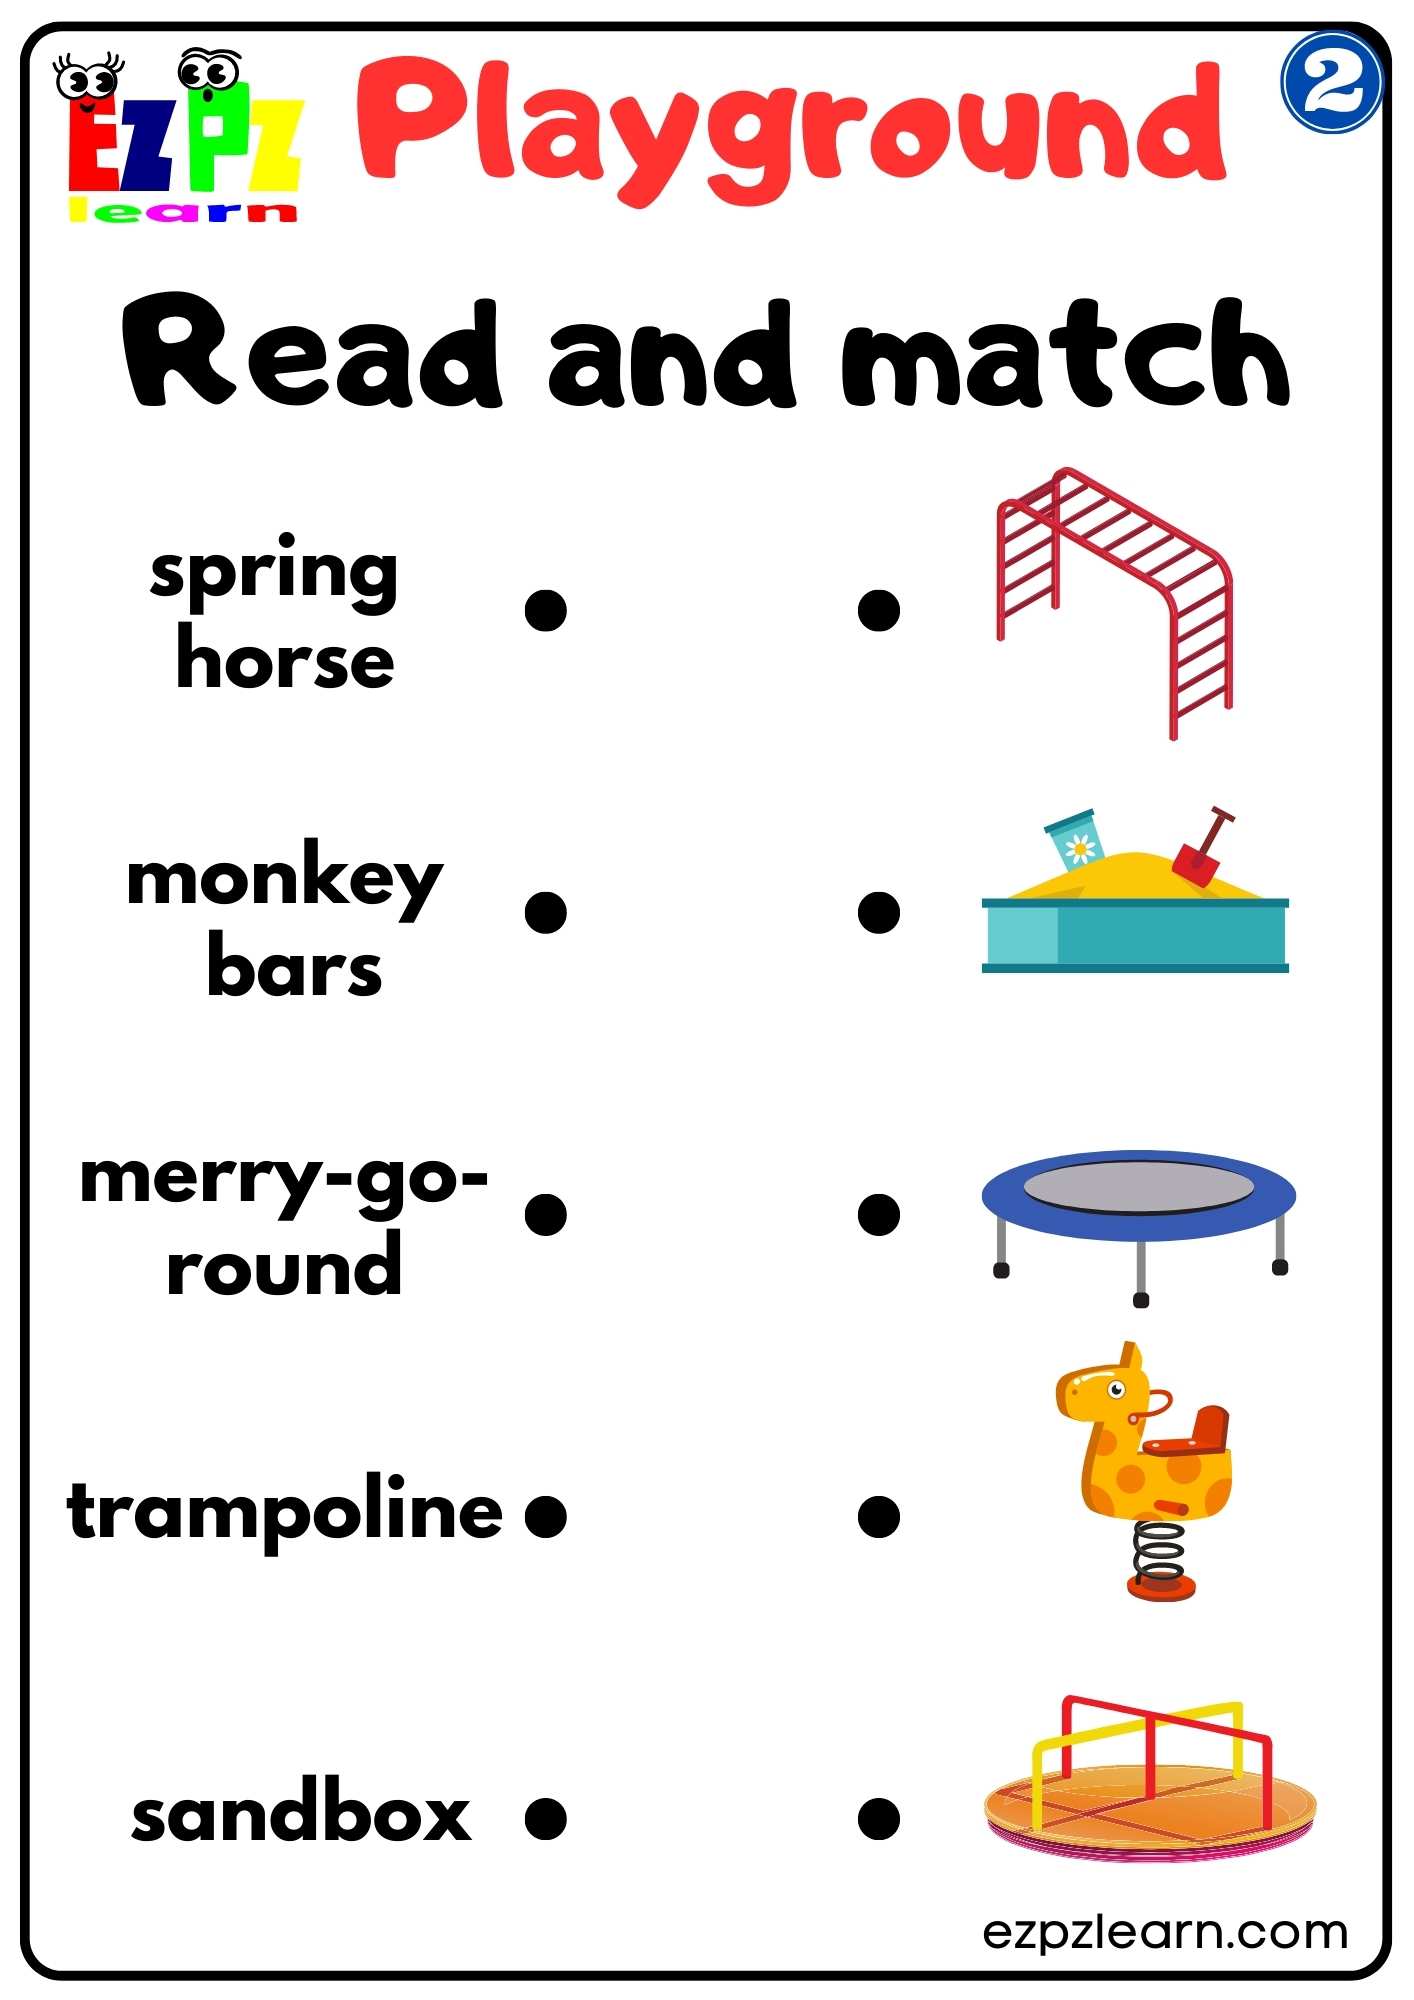 playground-vocabulary-2-read-and-match-worksheet-for-kindergarten-and-esl-students-free-download